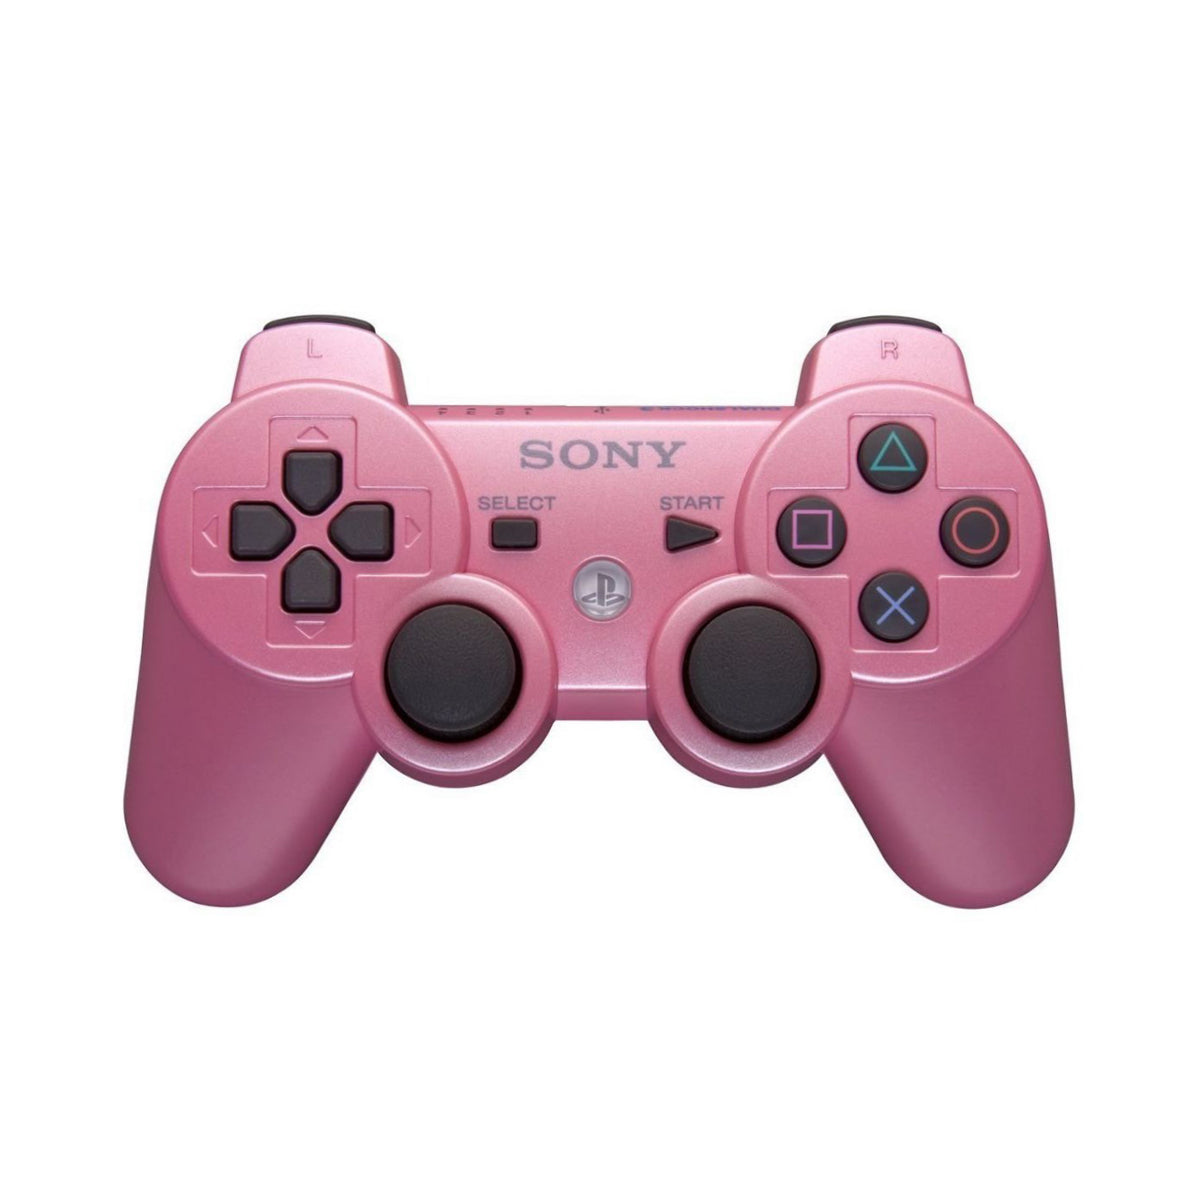 Sony PlayStation 3 DualShock 3 Analog Controller - Candy Pink - YourGamingShop.com - Buy, Sell, Trade Video Games Online. 120 Day Warranty. Satisfaction Guaranteed.